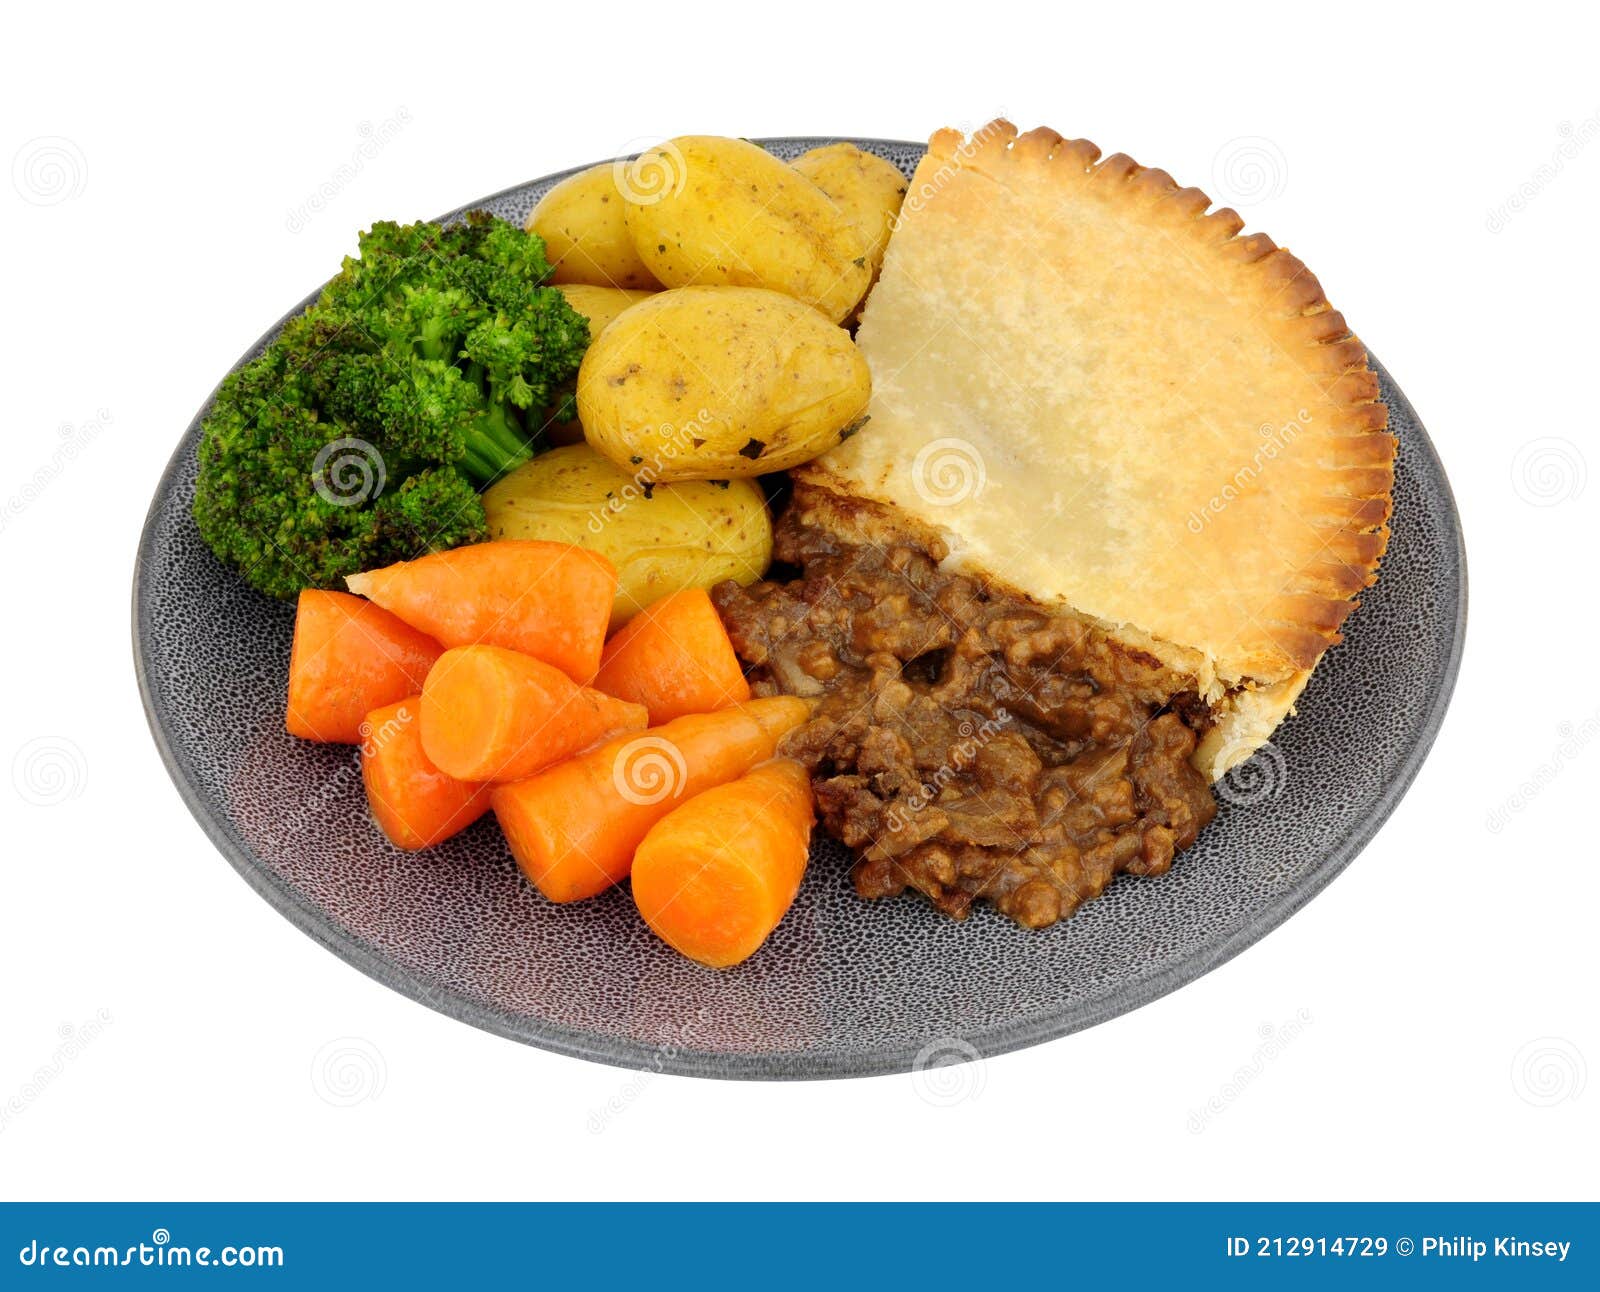 https://thumbs.dreamstime.com/z/minced-beef-onion-pie-meal-vegetables-isolated-white-background-minced-beef-onion-pie-meal-212914729.jpg